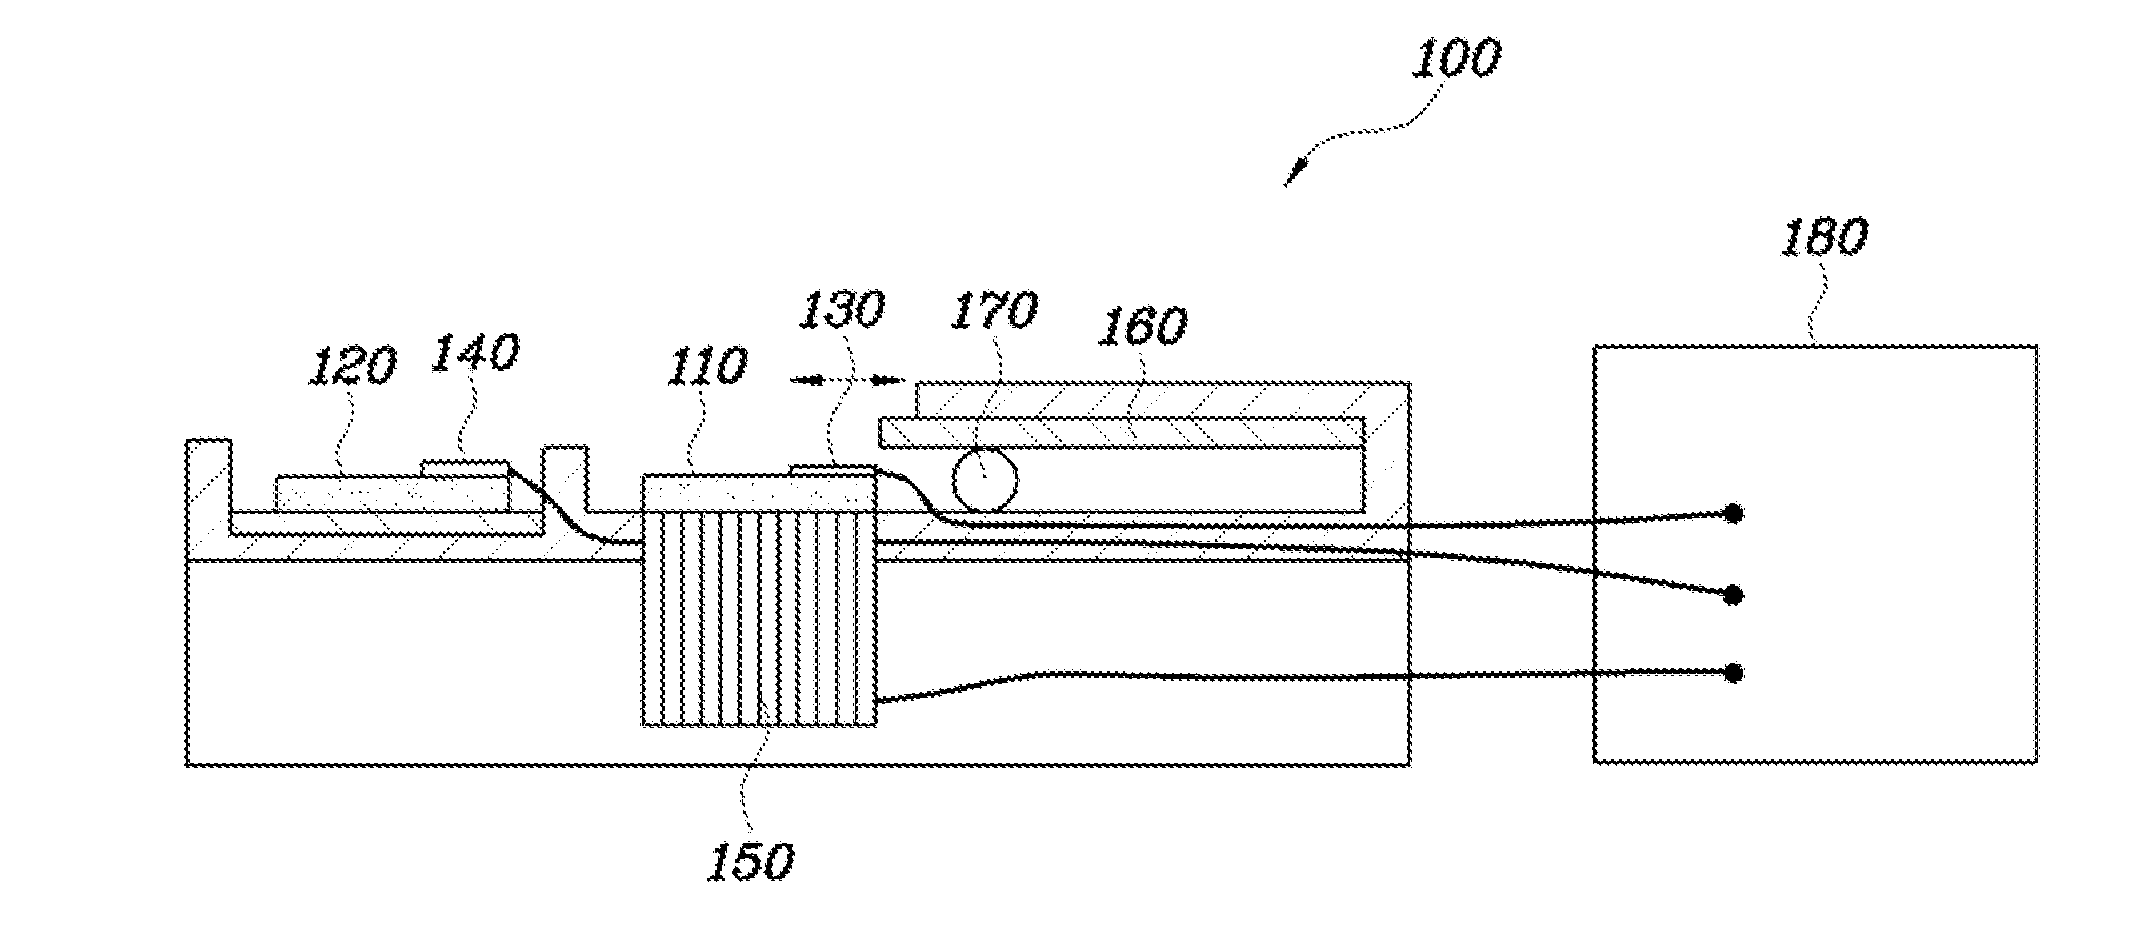 Apparatus and Method for Measurement of Radiation Intensity for Testing Reliability of Solar Cell, and Method for Testing Reliability of Solar Cell